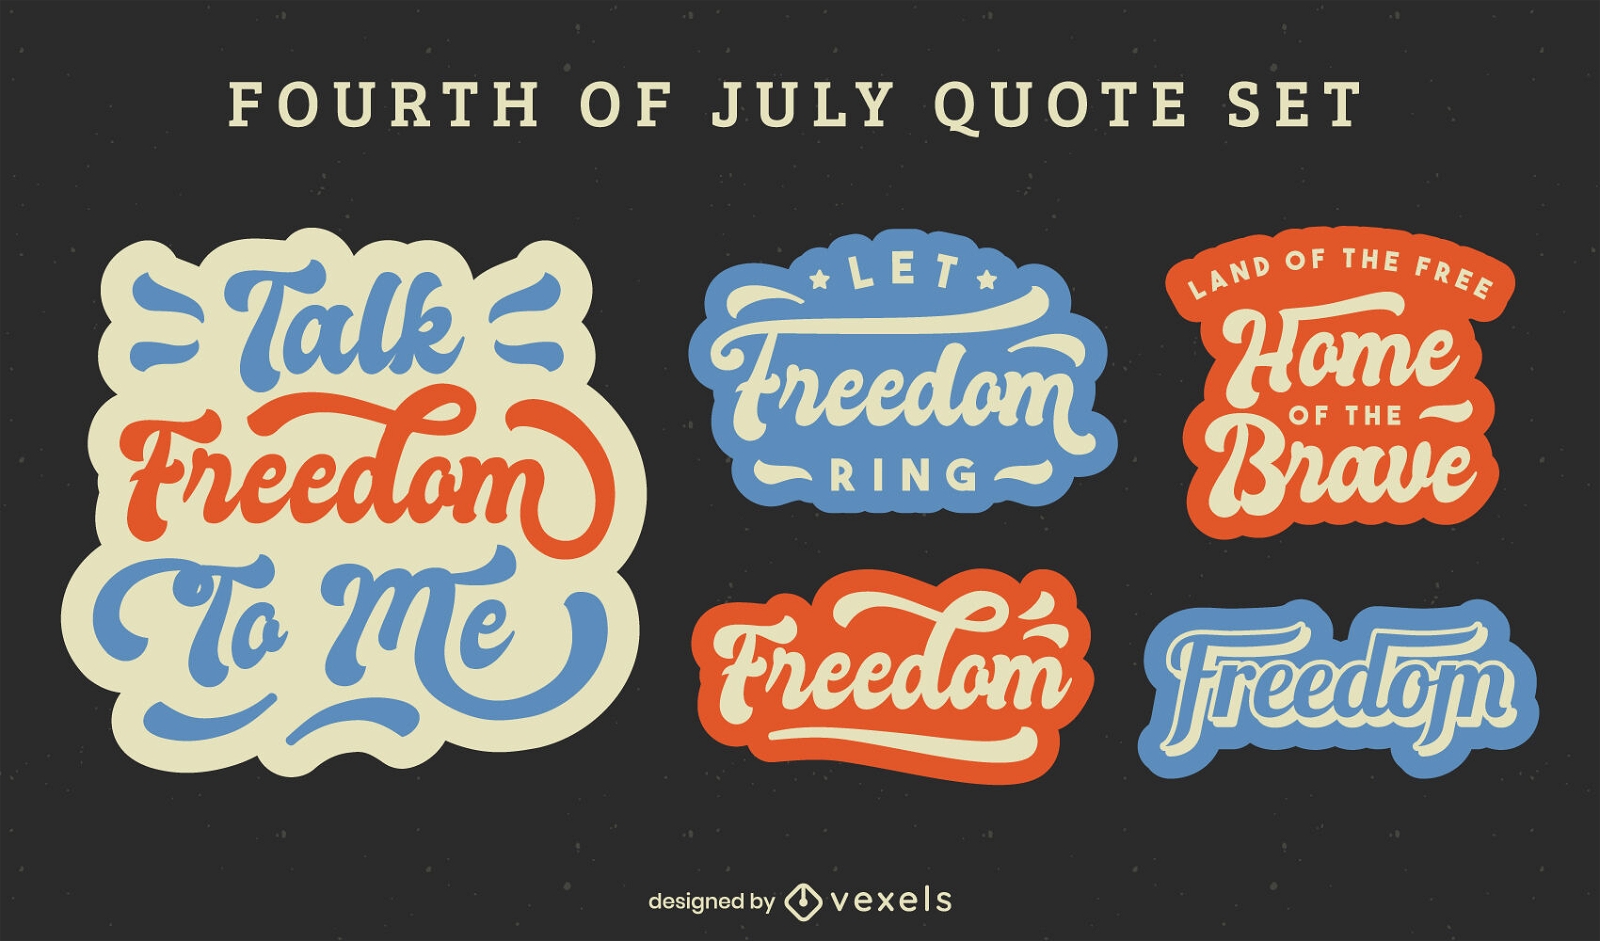 Fourth of July quote lettering stickers set